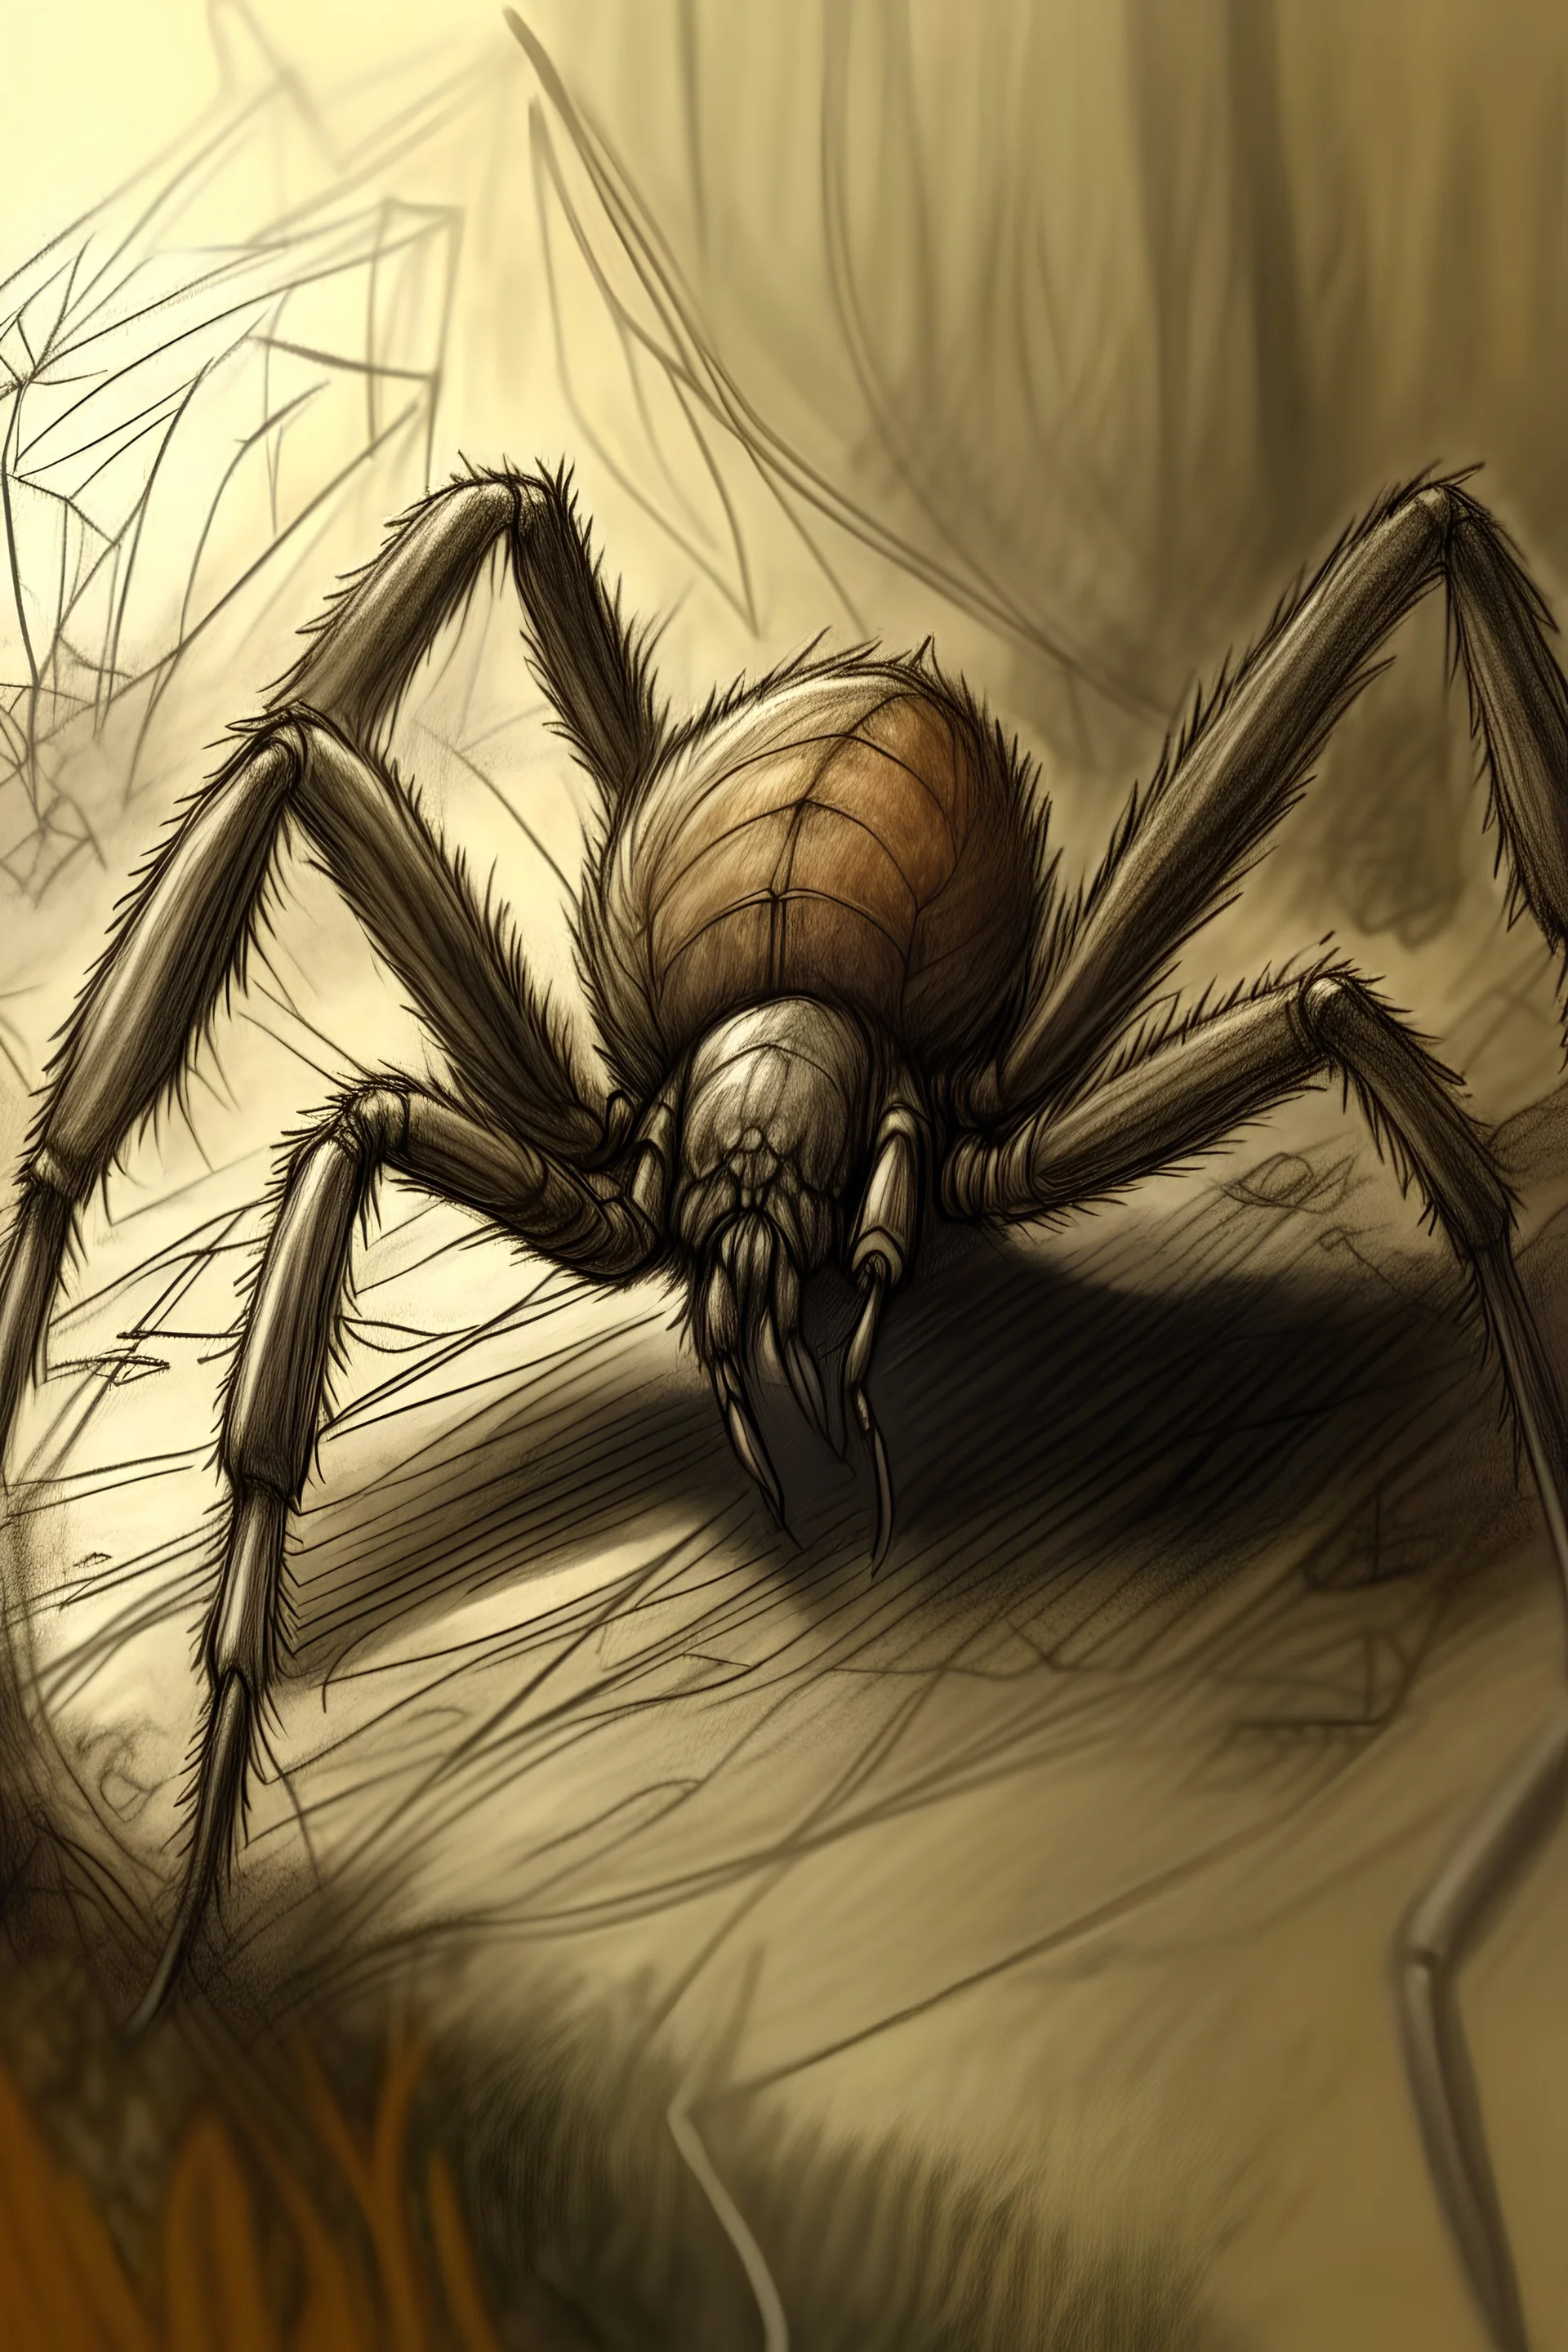 Drawing parts of a spider's body in a wonderful, harmonious scene